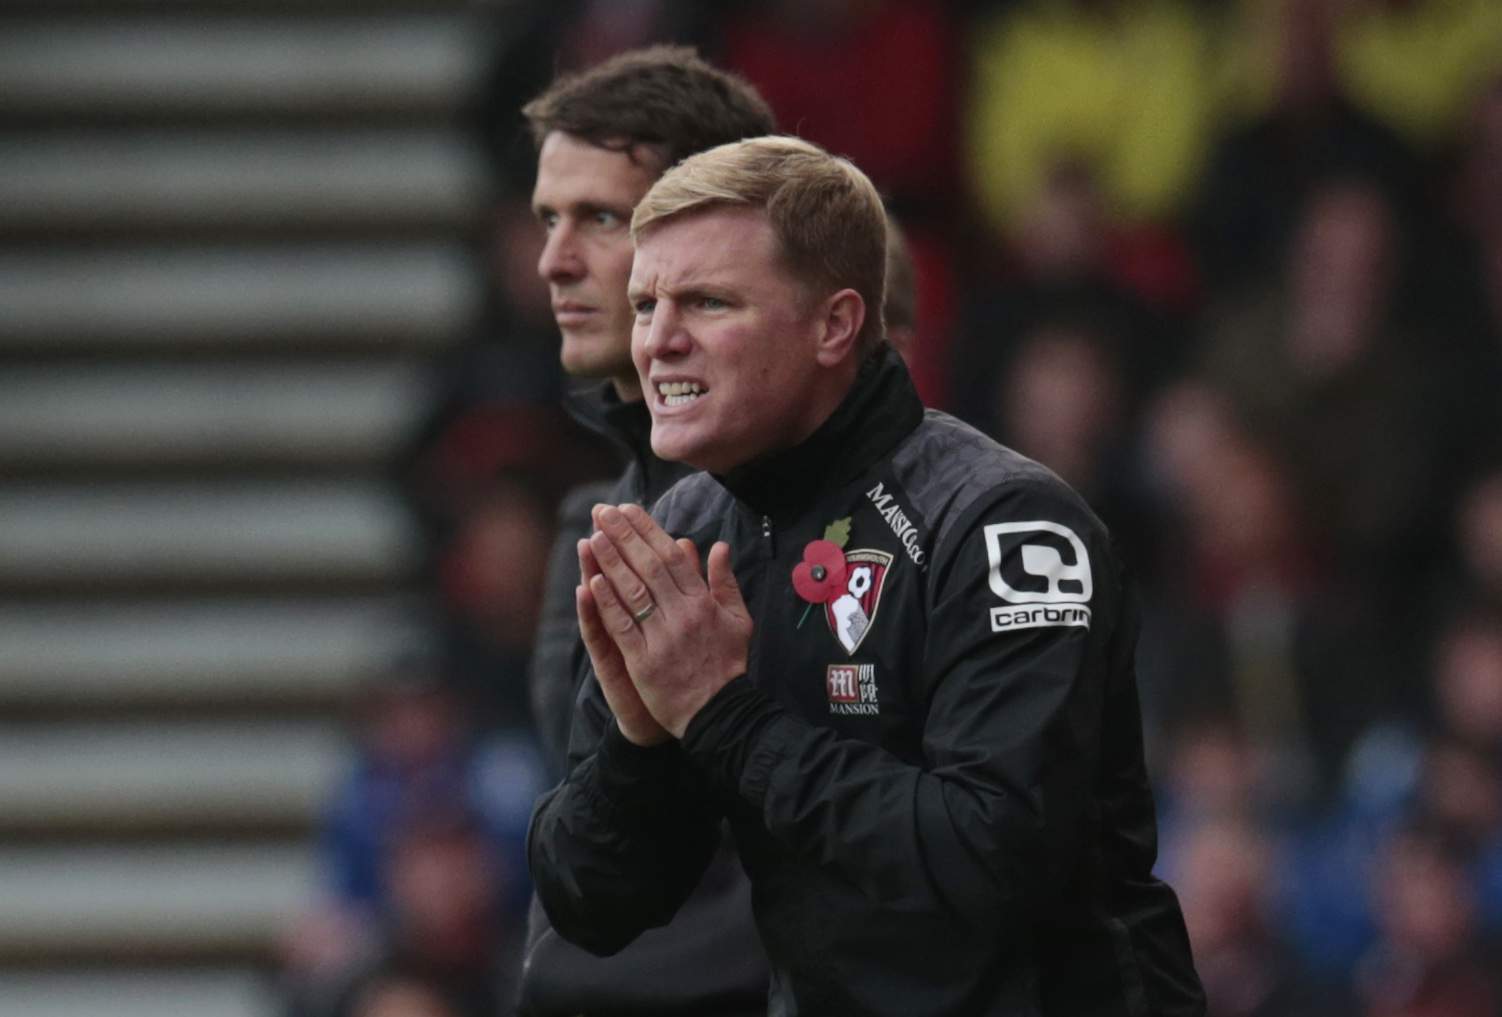 Football - AFC Bournemouth v Newcastle United - Barclays Premier League - Vitality Stadium, Dean Court - 7/11/15 Bournemouth manager Eddie Howe Reuters / Suzanne Plunkett Livepic EDITORIAL USE ONLY. No use with unauthorized audio, video, data, fixture lists, club/league logos or "live" services. Online in-match use limited to 45 images, no video emulation. No use in betting, games or single club/league/player publications.  Please contact your account representative for further details.